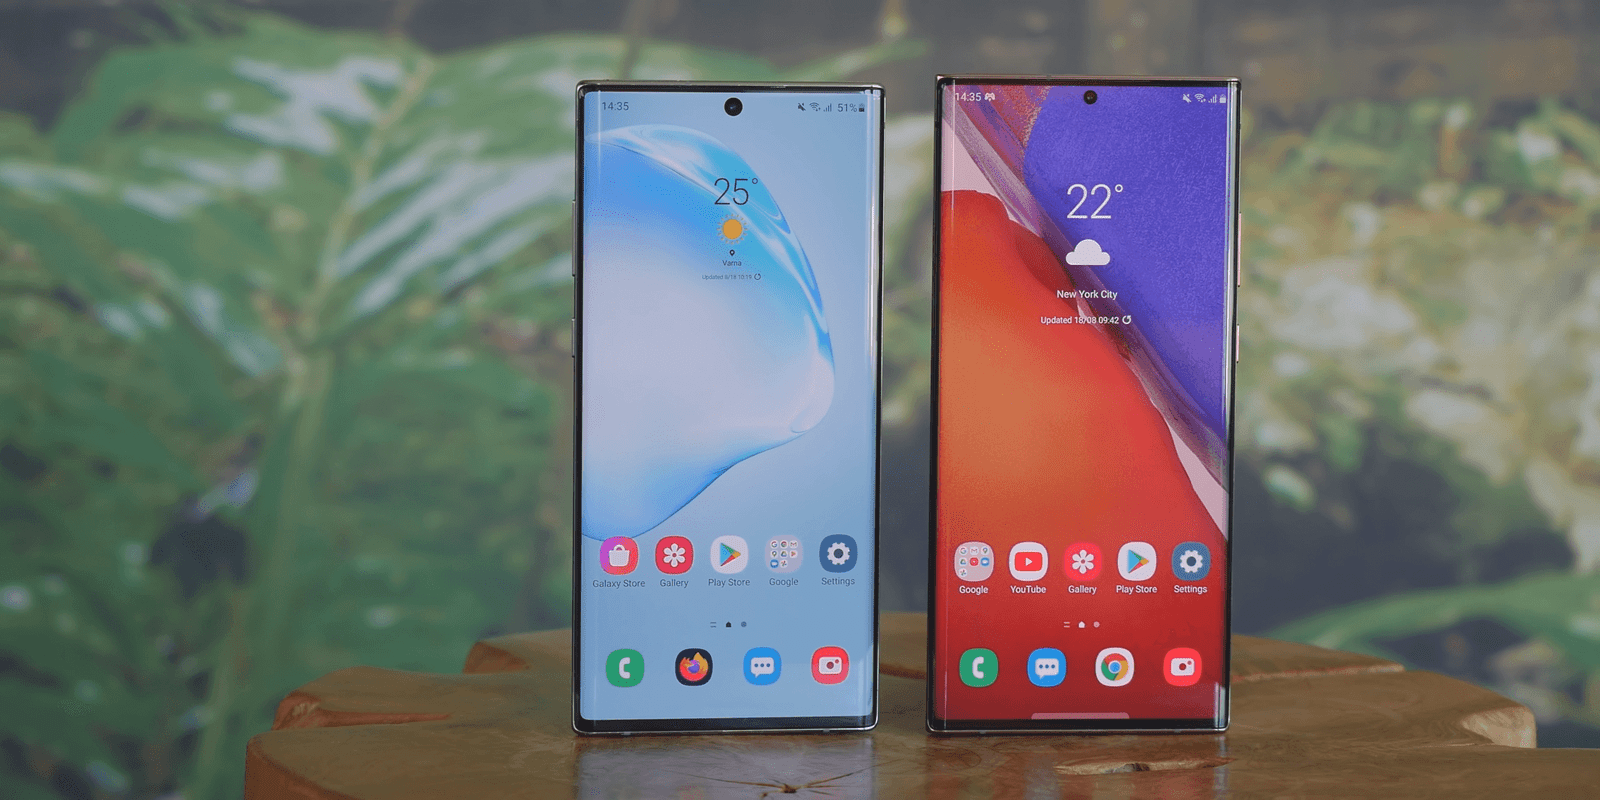 Samsung Galaxy Note 10 Plus vs Note 20 Ultra front